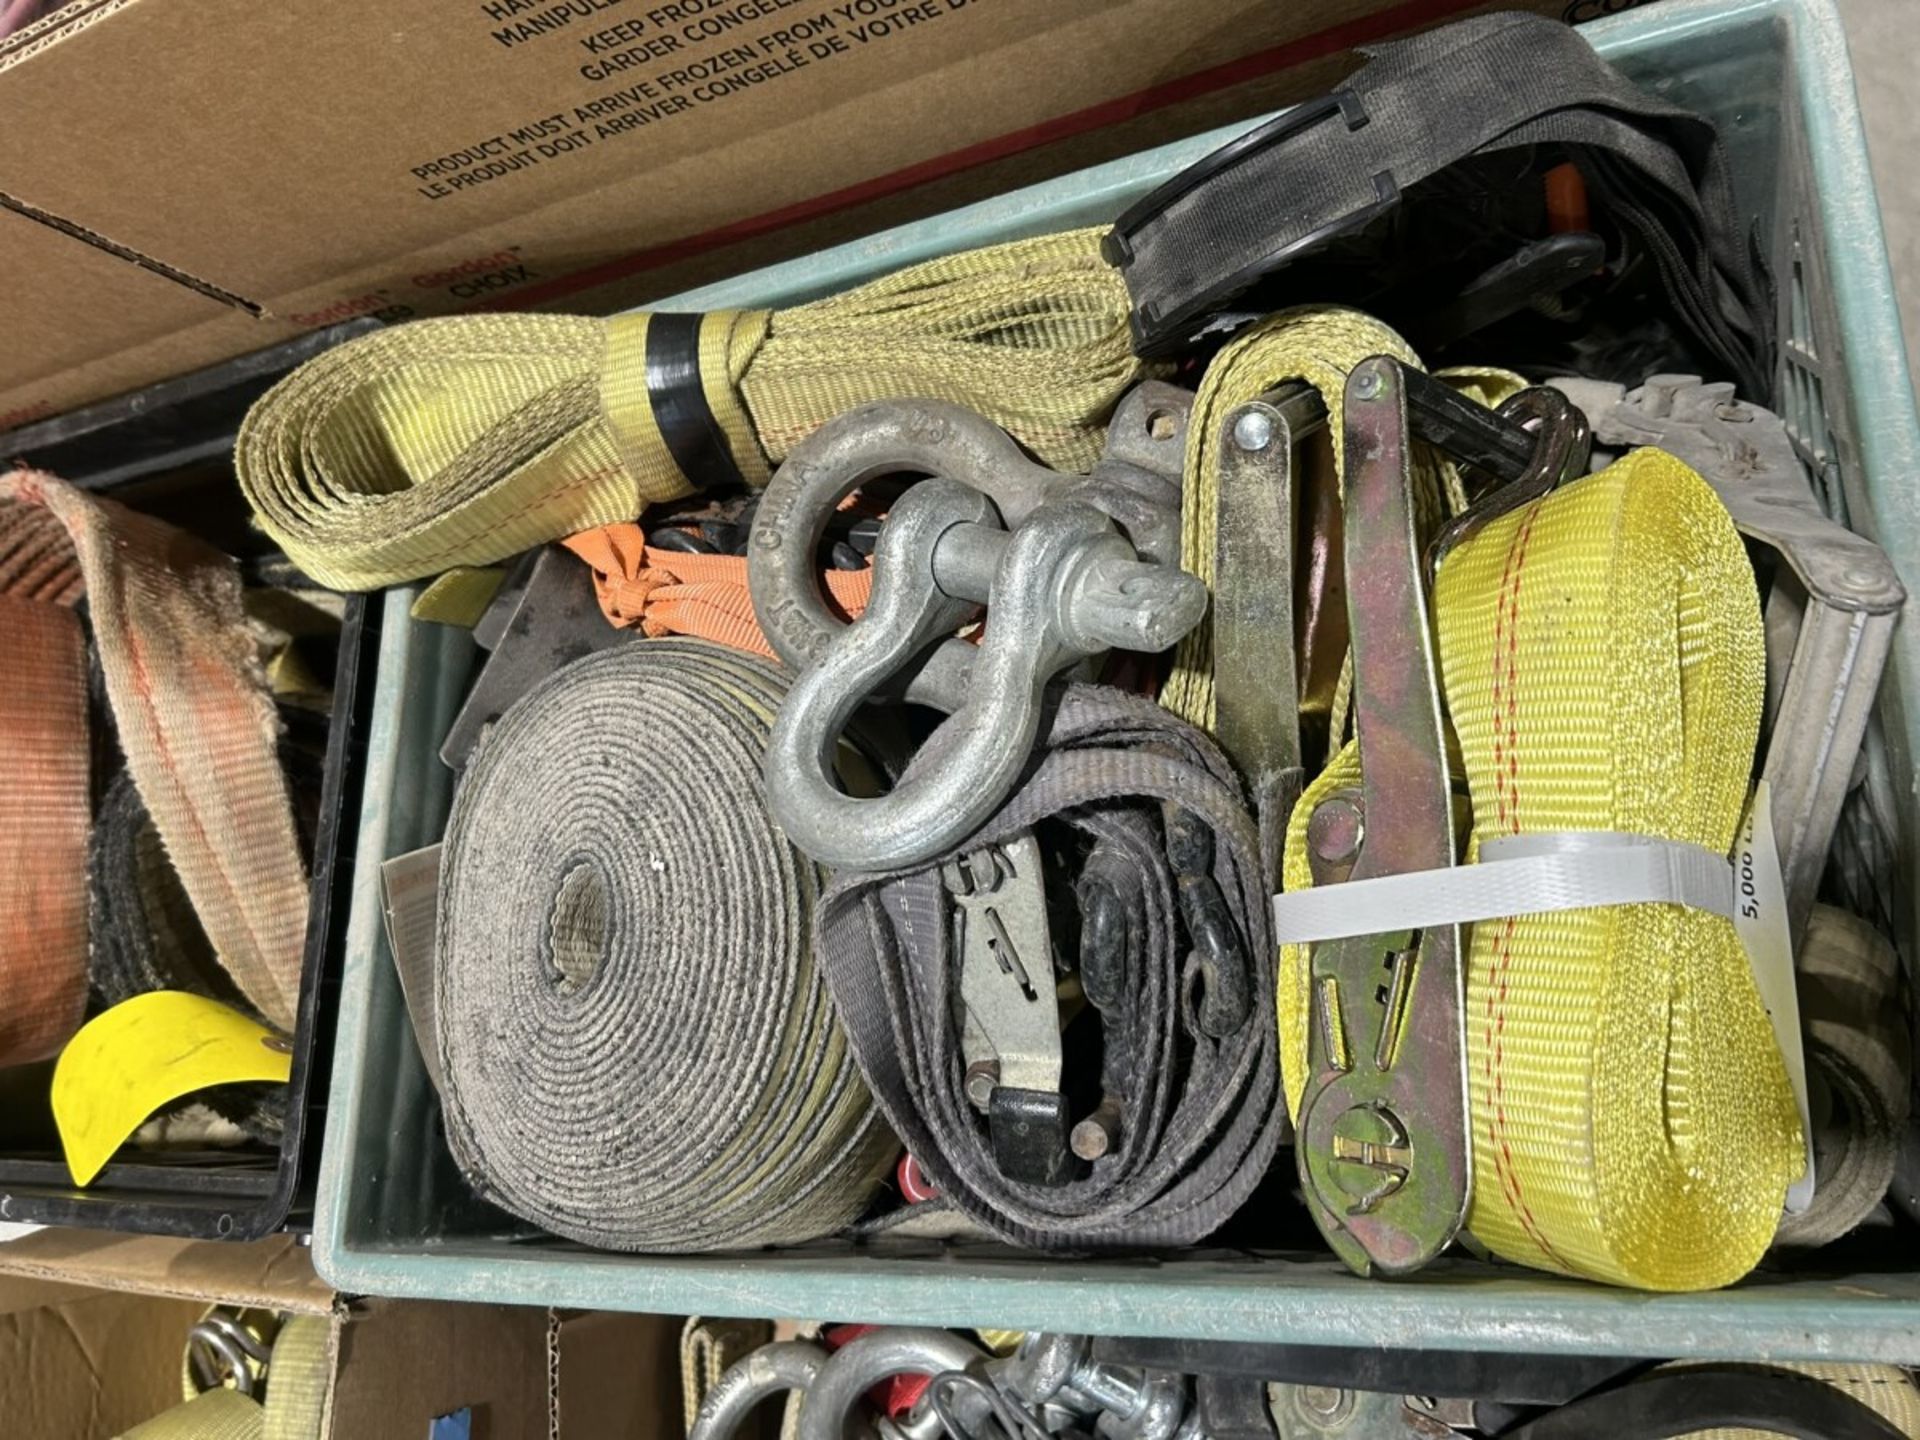 L/O ASSORTED WEB STRAPS, RATCHET STRAPS, SLINGS, TOW STRAPS, ETC. - Image 3 of 8